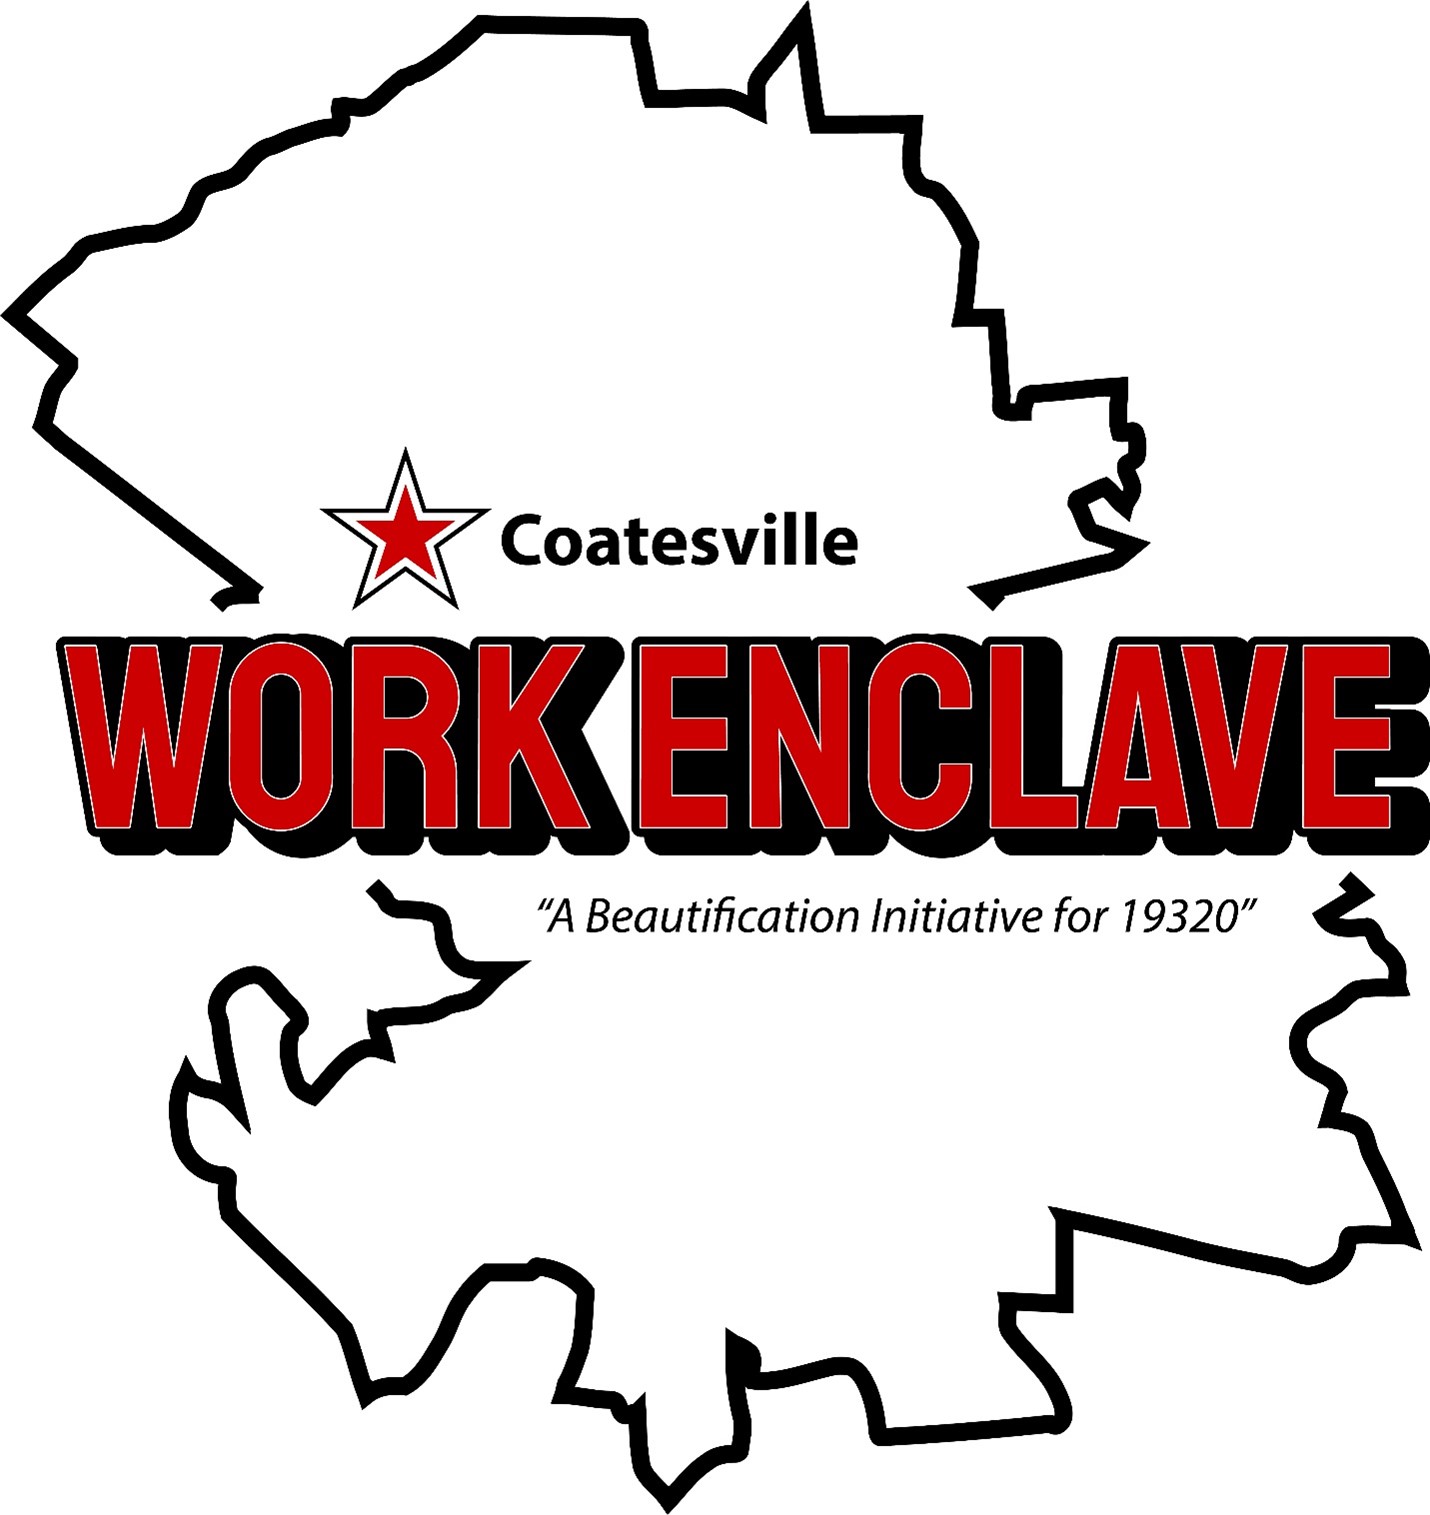 Work Enclave Program: A Beautification Initiative for 19320